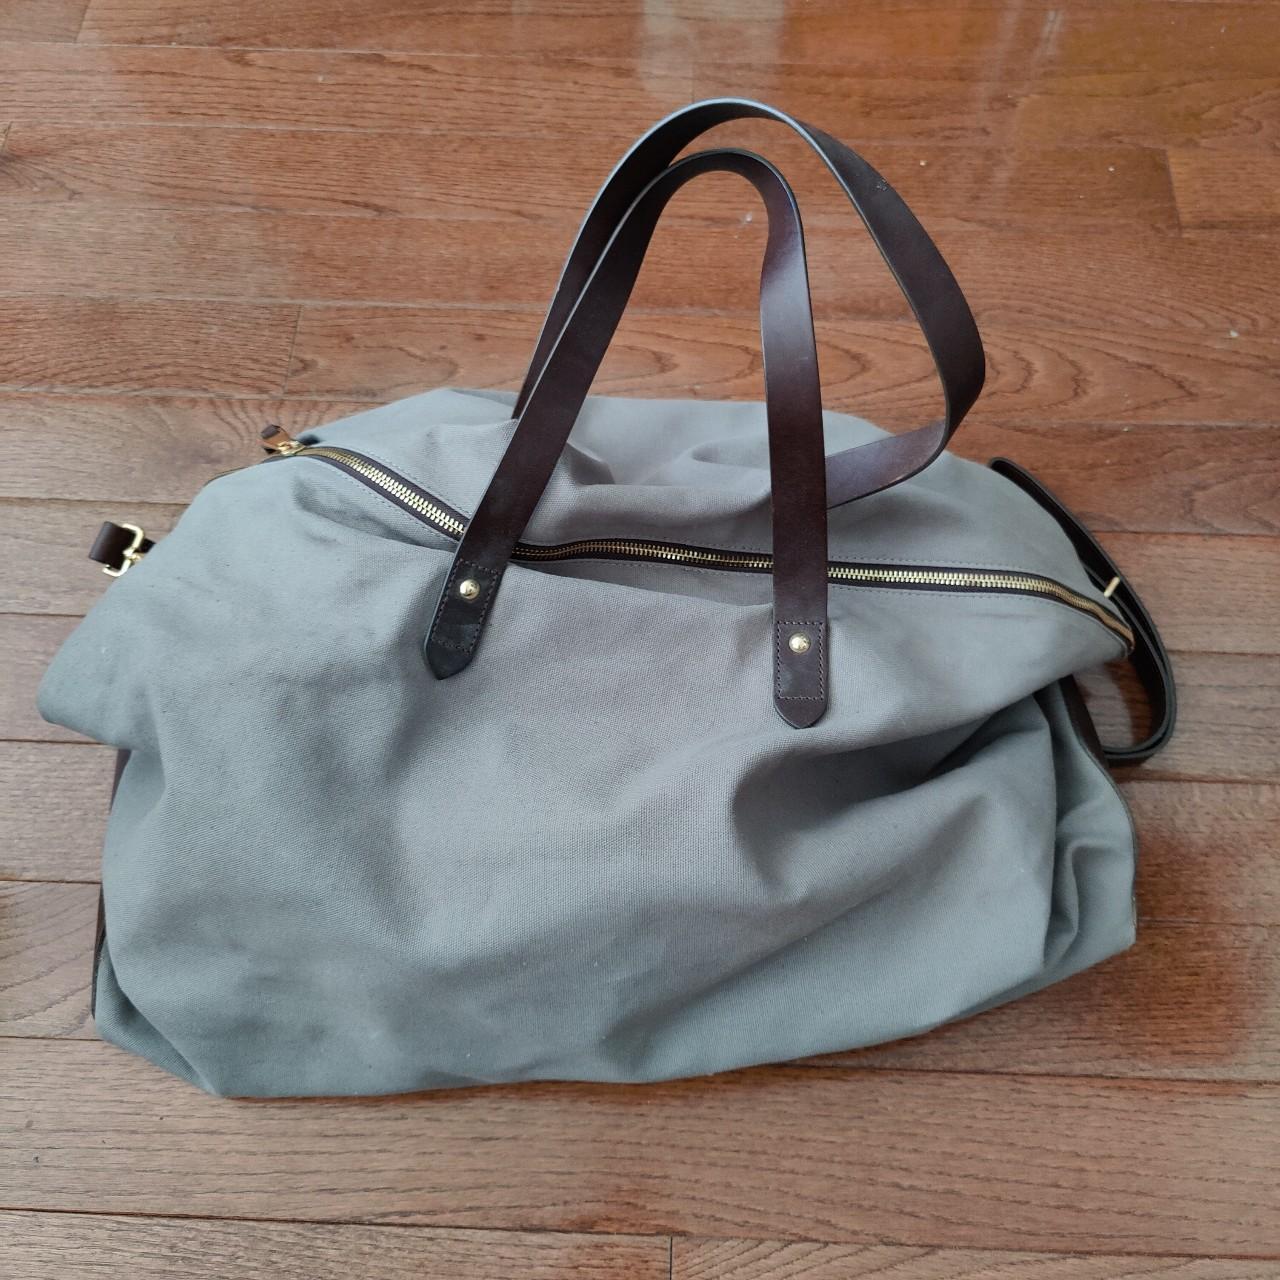 Product Image 2 - Cuyana Weekender Bag Charcoal Grey

Leather